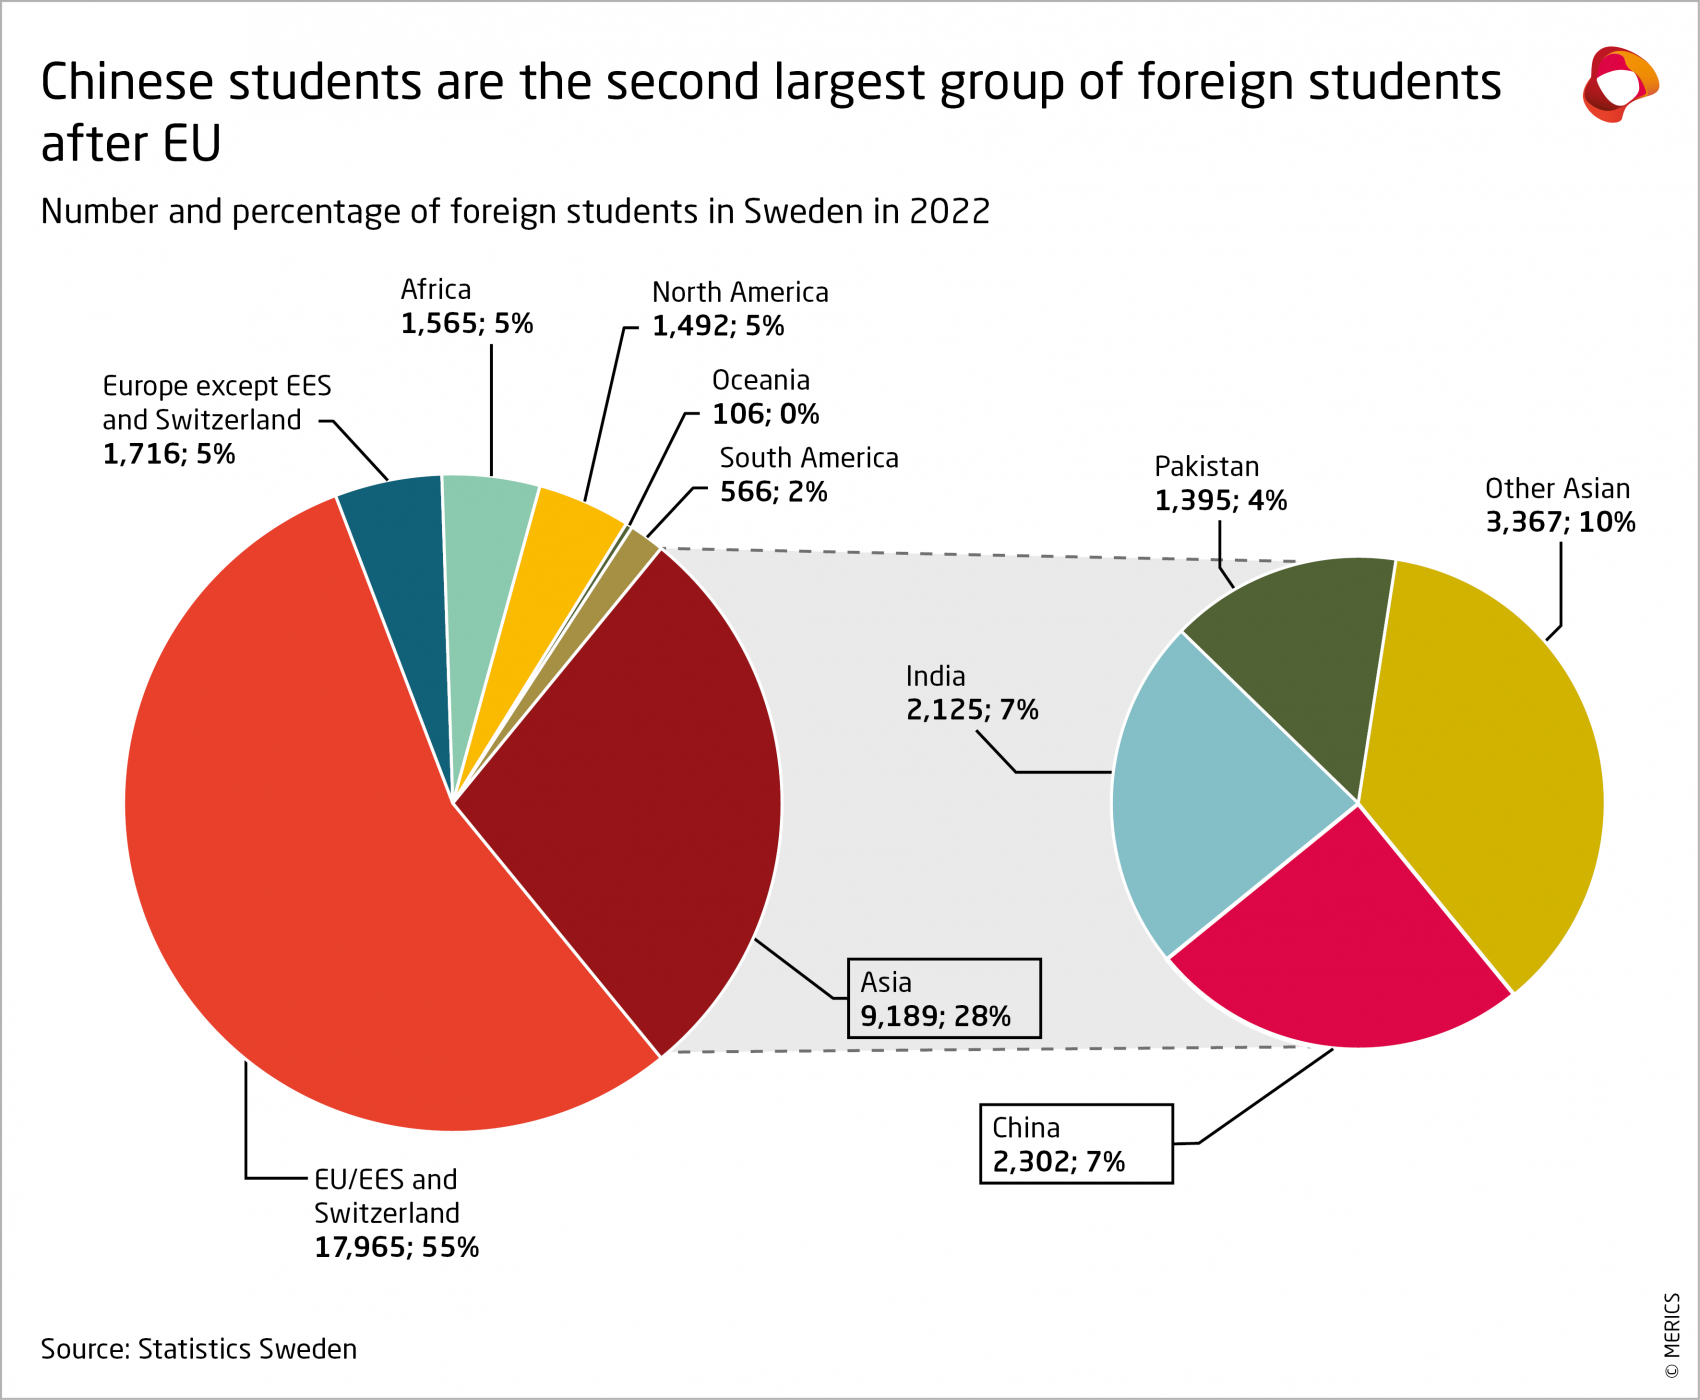 Number and percentage of foreign students in Sweden 2022